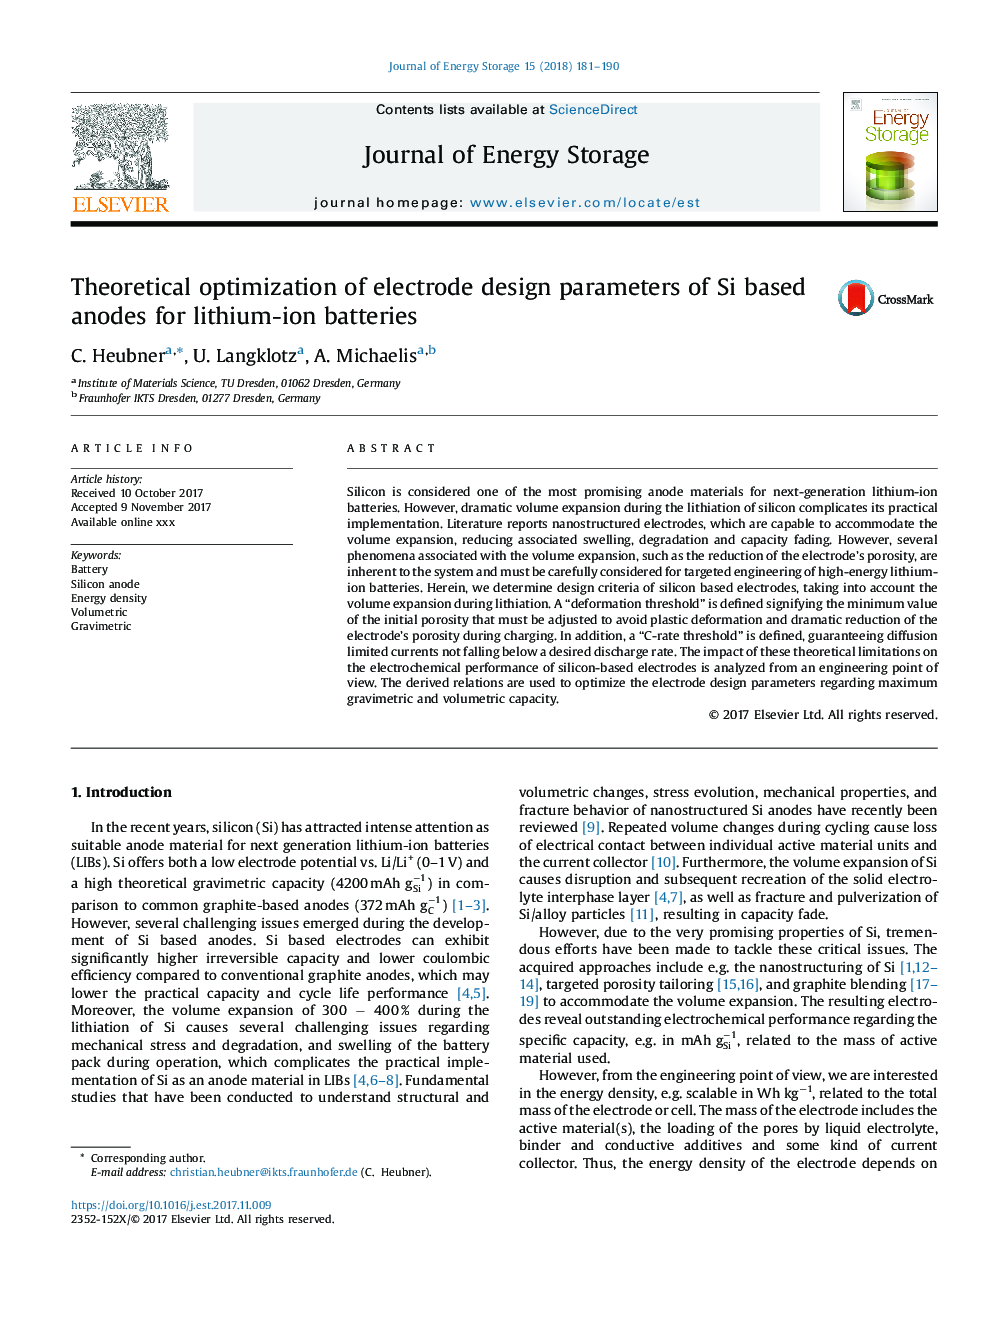 Theoretical optimization of electrode design parameters of Si based anodes for lithium-ion batteries